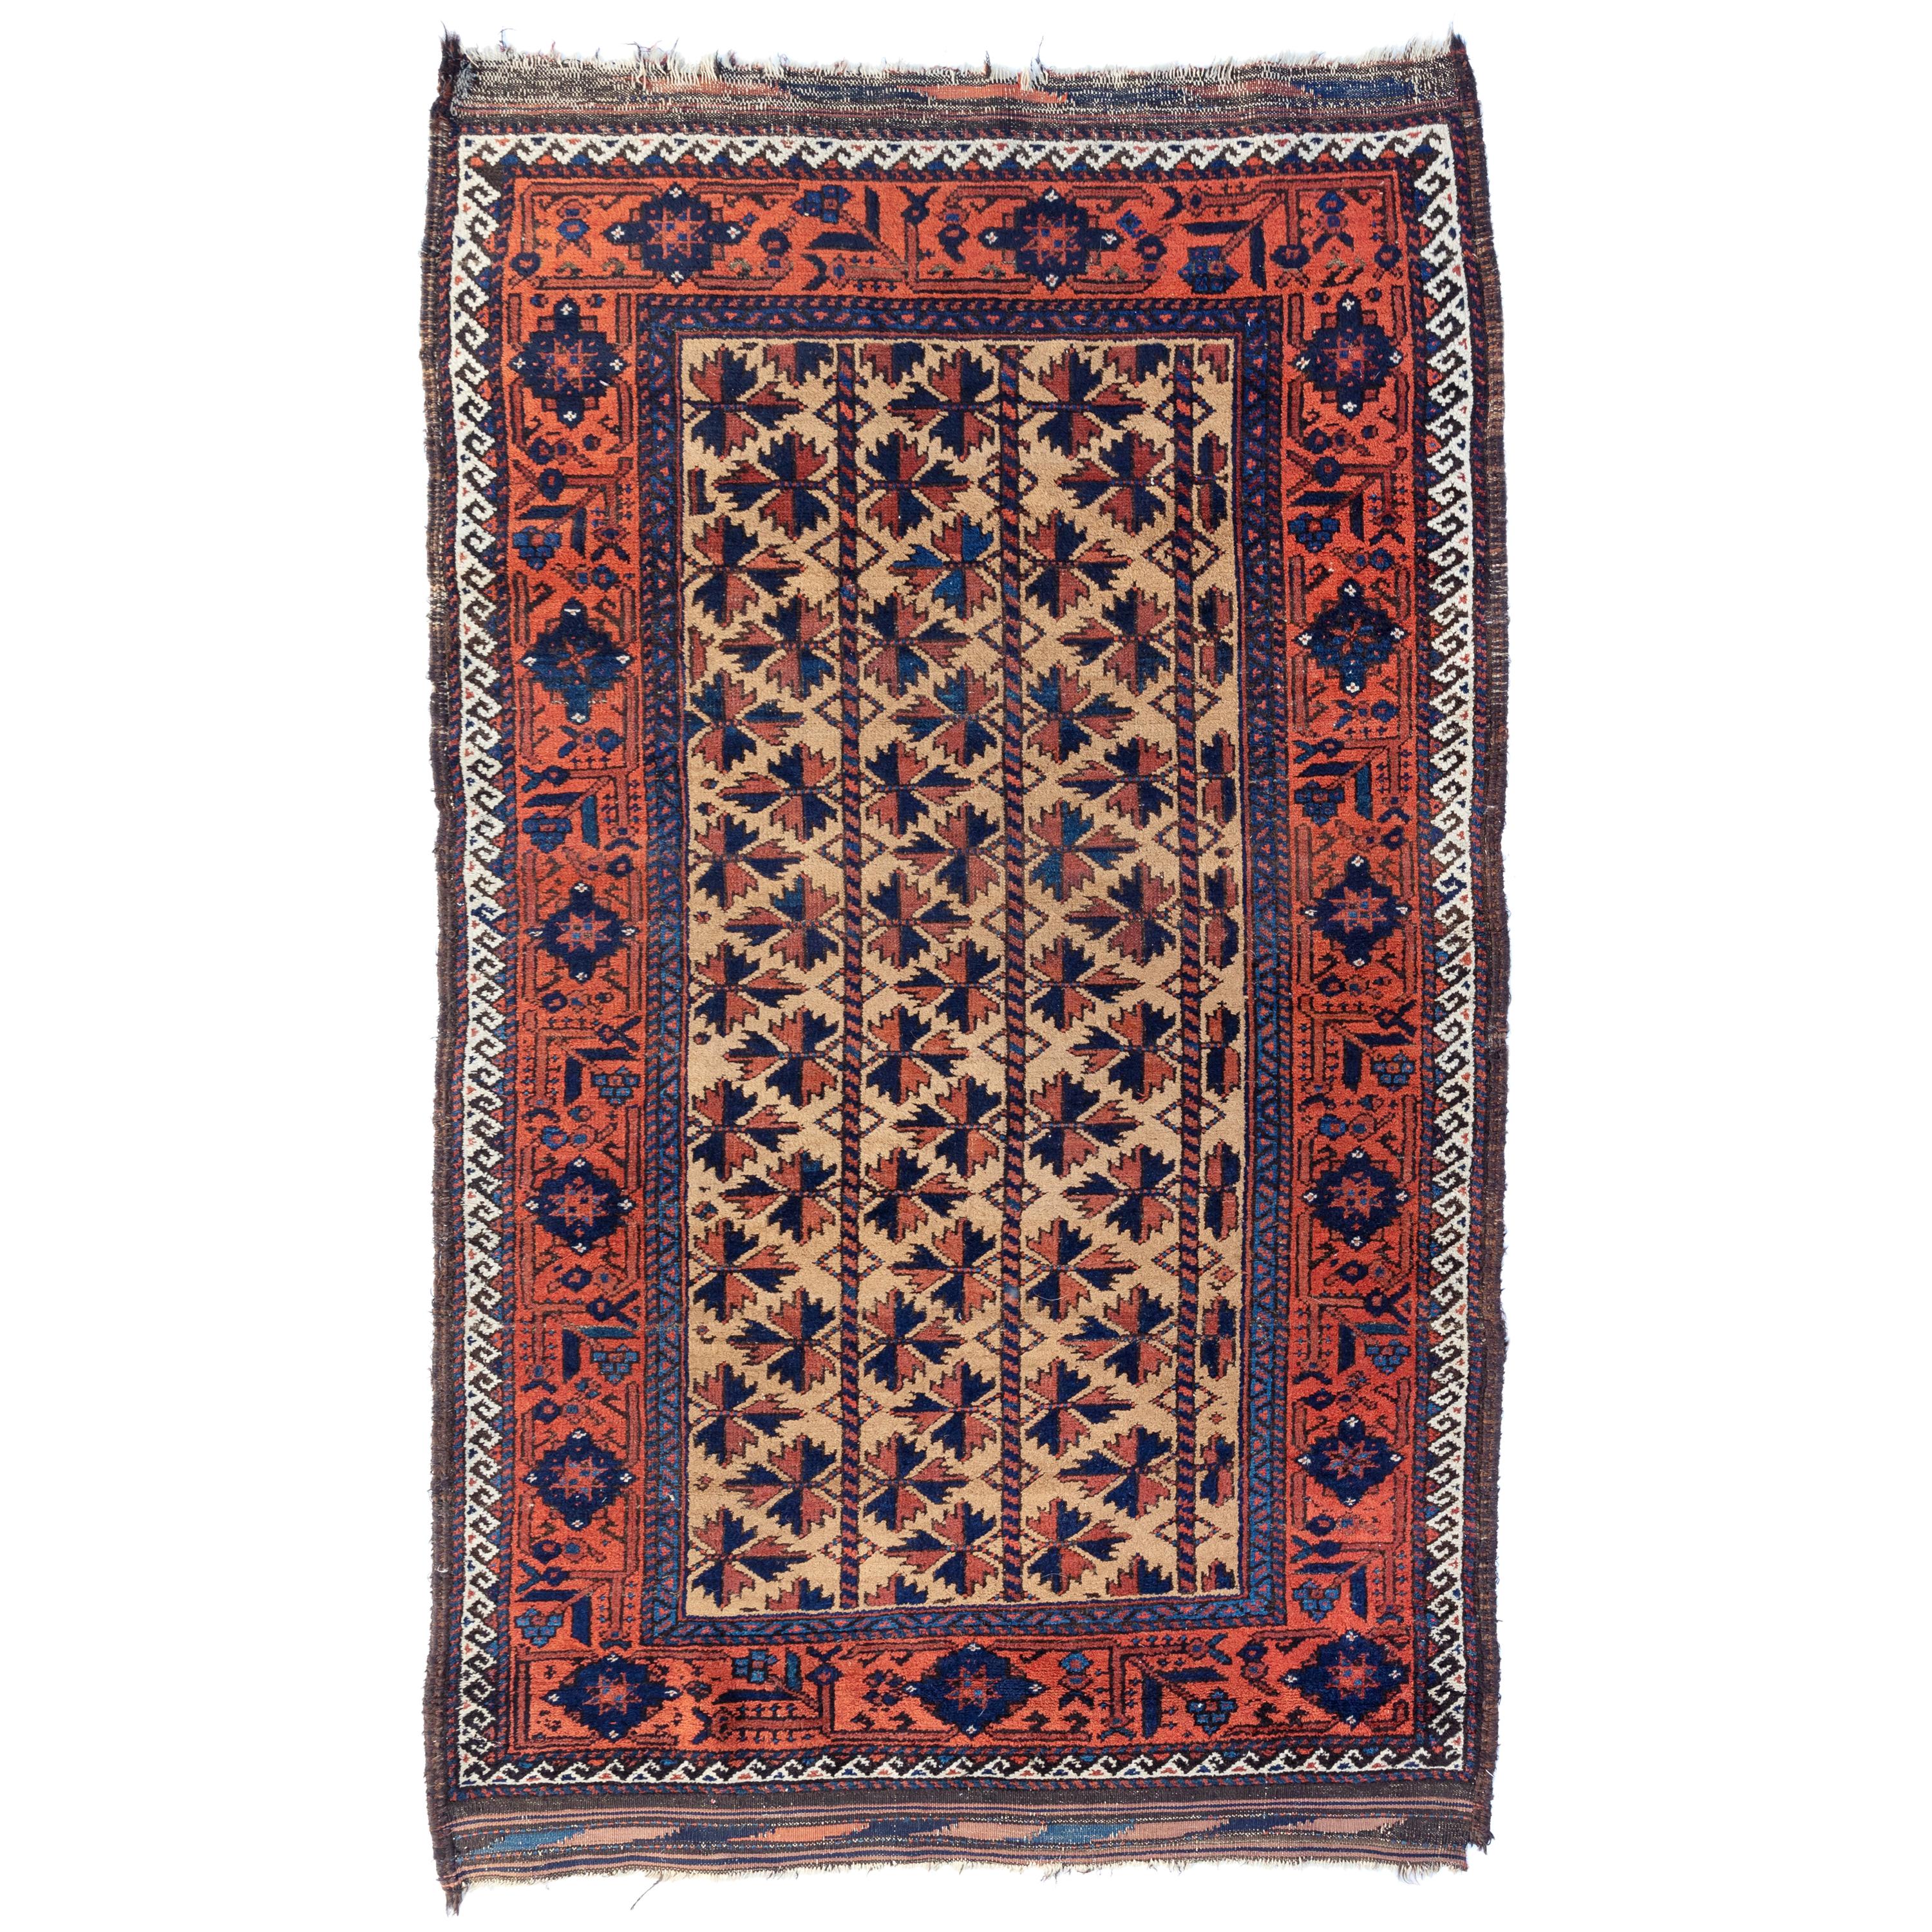 Antique Caucasian Rust Blue Ivory Geometric Tribal Baluch Rug, circa 1900s-1910s For Sale